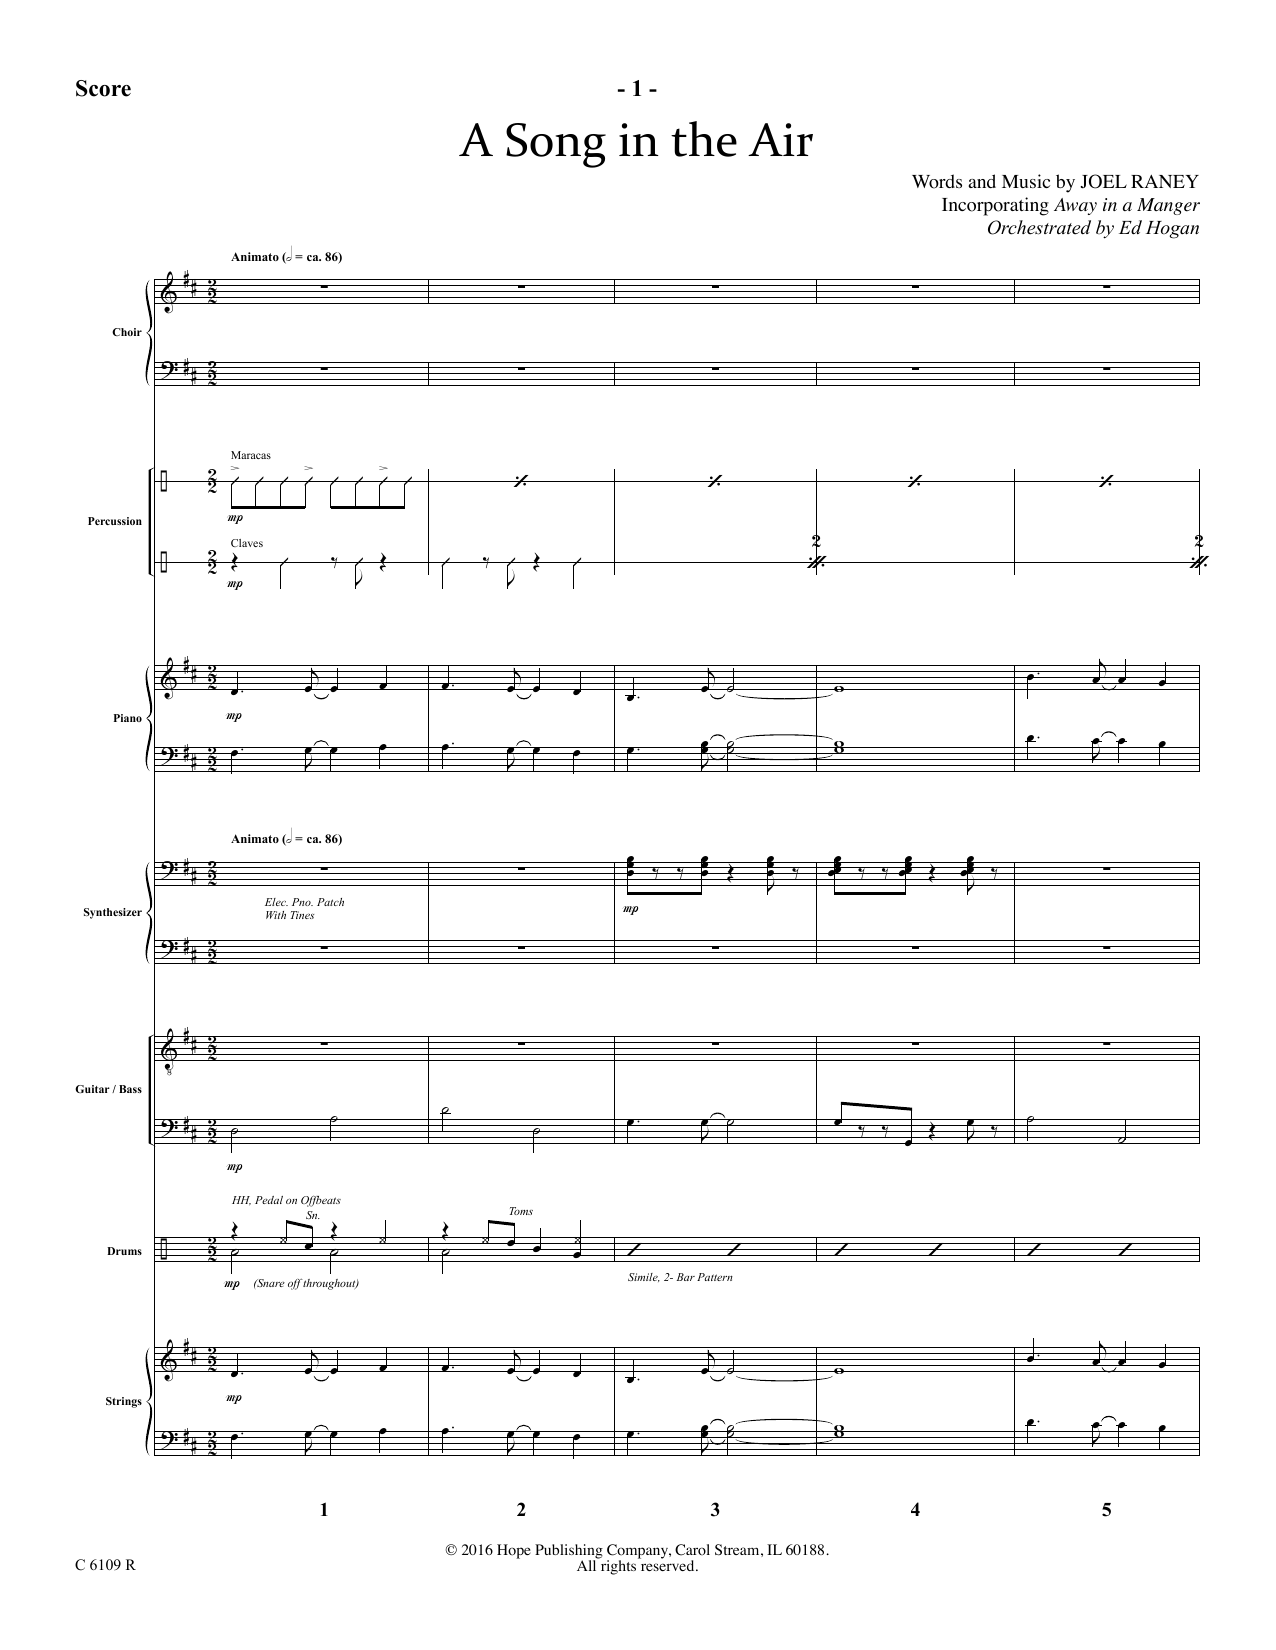 Download Joel Raney A Song In The Air - Full Score Sheet Music